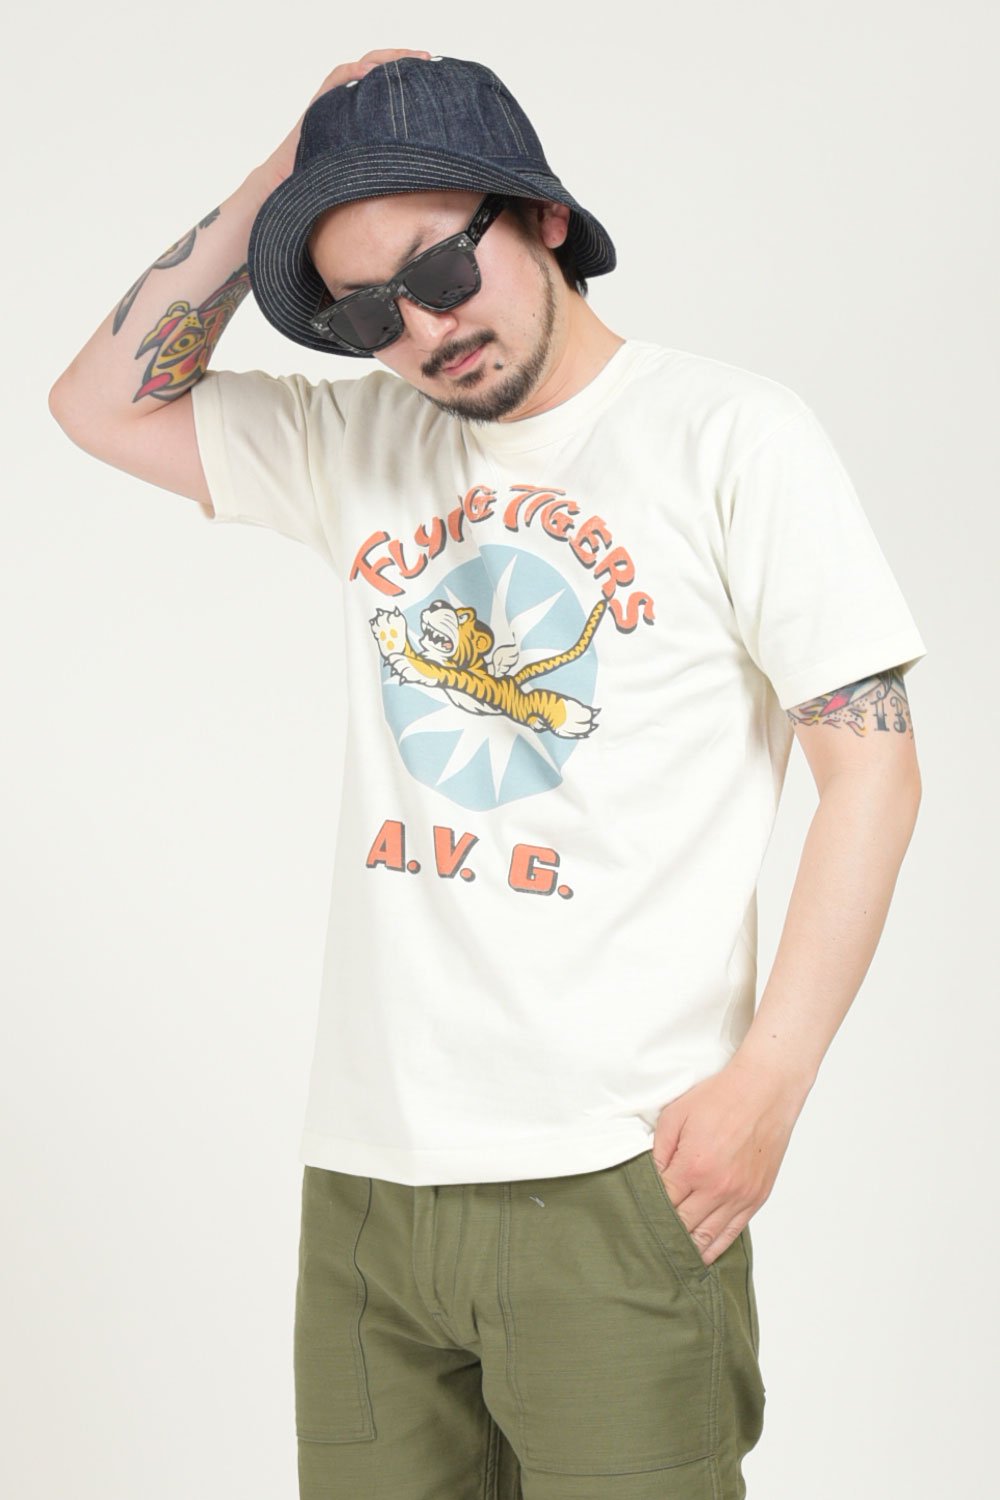 TOYS McCOY(トイズマッコイ) Tシャツ MILITARY TEE SHIRT"FLYING TIGERS A.V.G